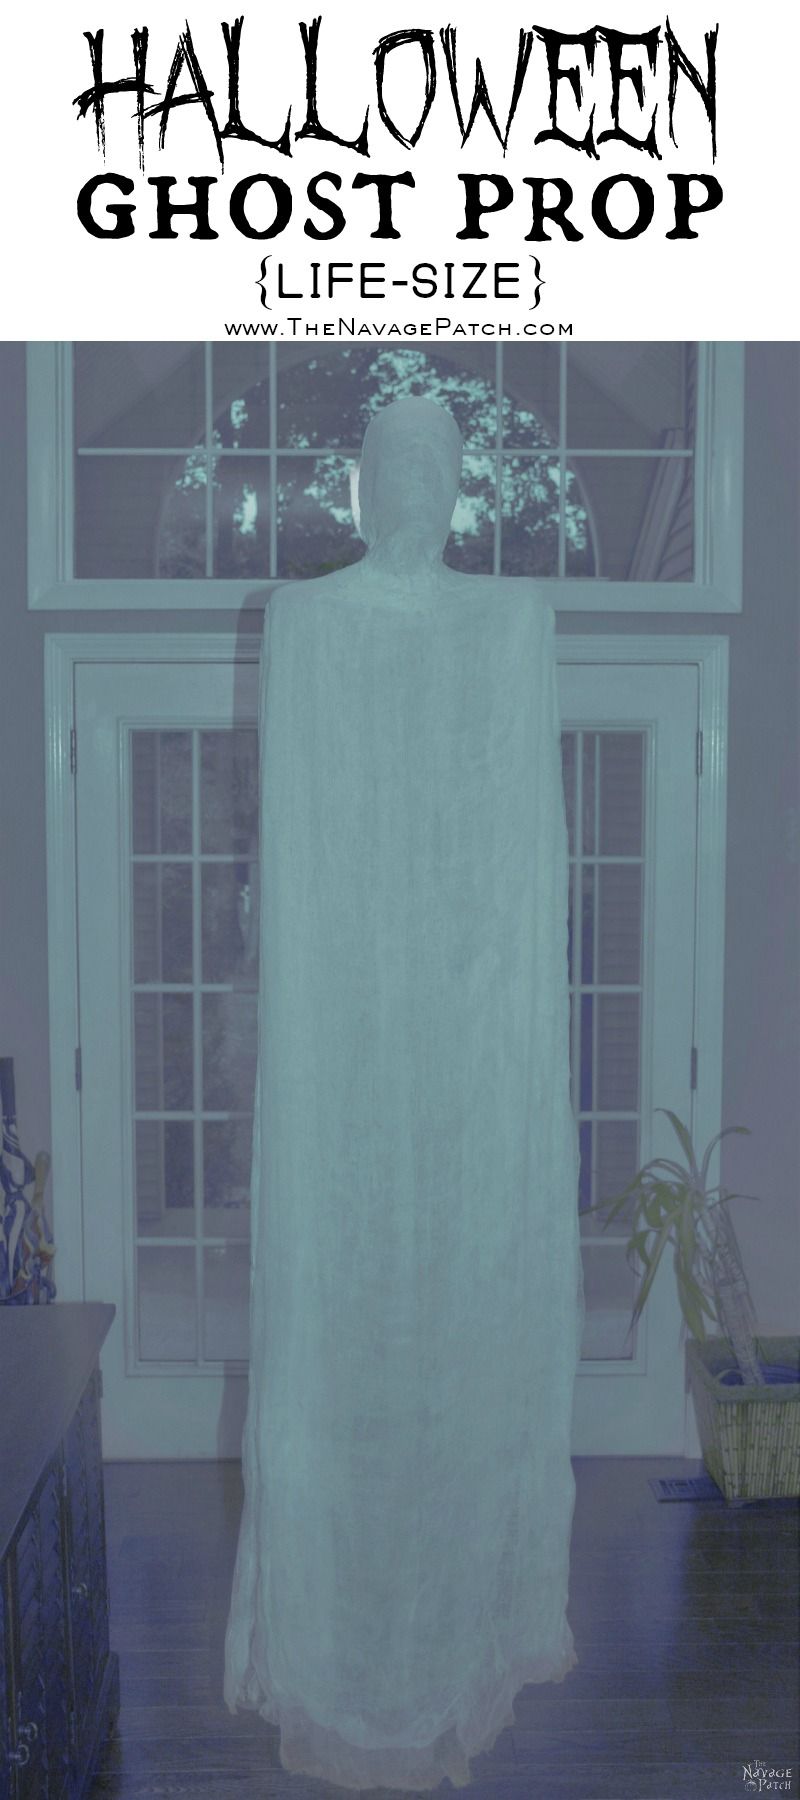 Halloween Ghost Prop {Life-Size} | A Life-Size Halloween Prop | How to make a ghost for Halloween | DIY Halloween decor | Easy & budget crafts | DIY Life-size ghost | Spooky and gothic decor | Upcycled Halloween decor | TheNavagePatch.com